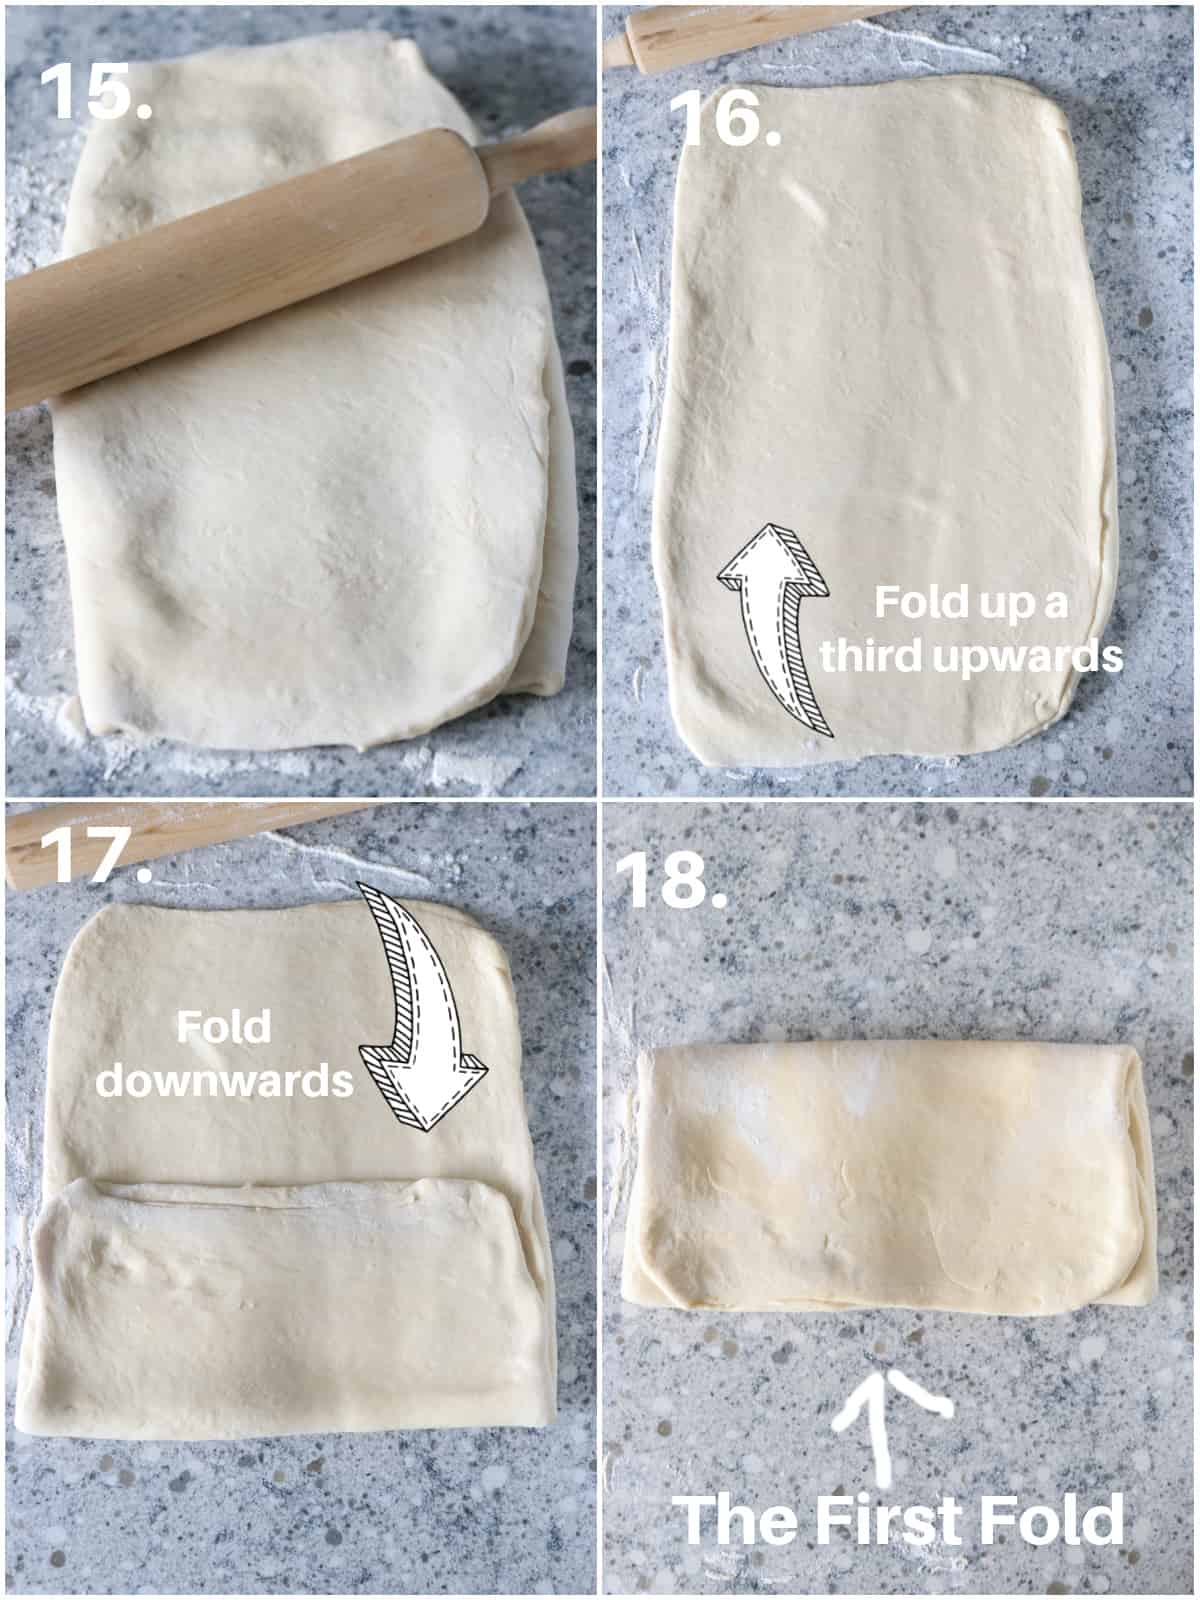 The collage for the first fold process of croissants.